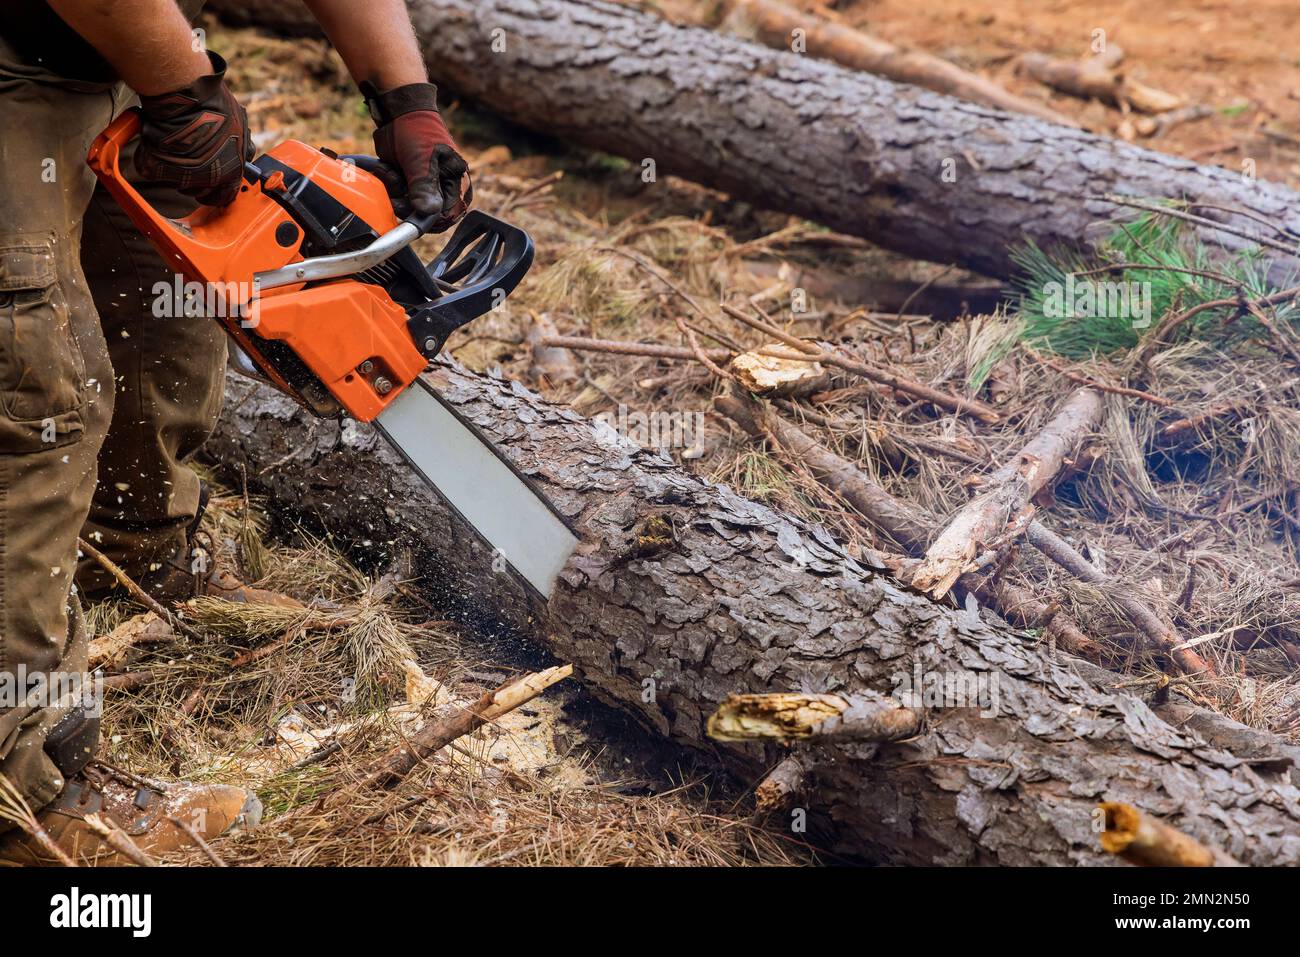 There is employee cutting trees with chainsaw during process of chopping down trees which results in destroying forest. Stock Photo